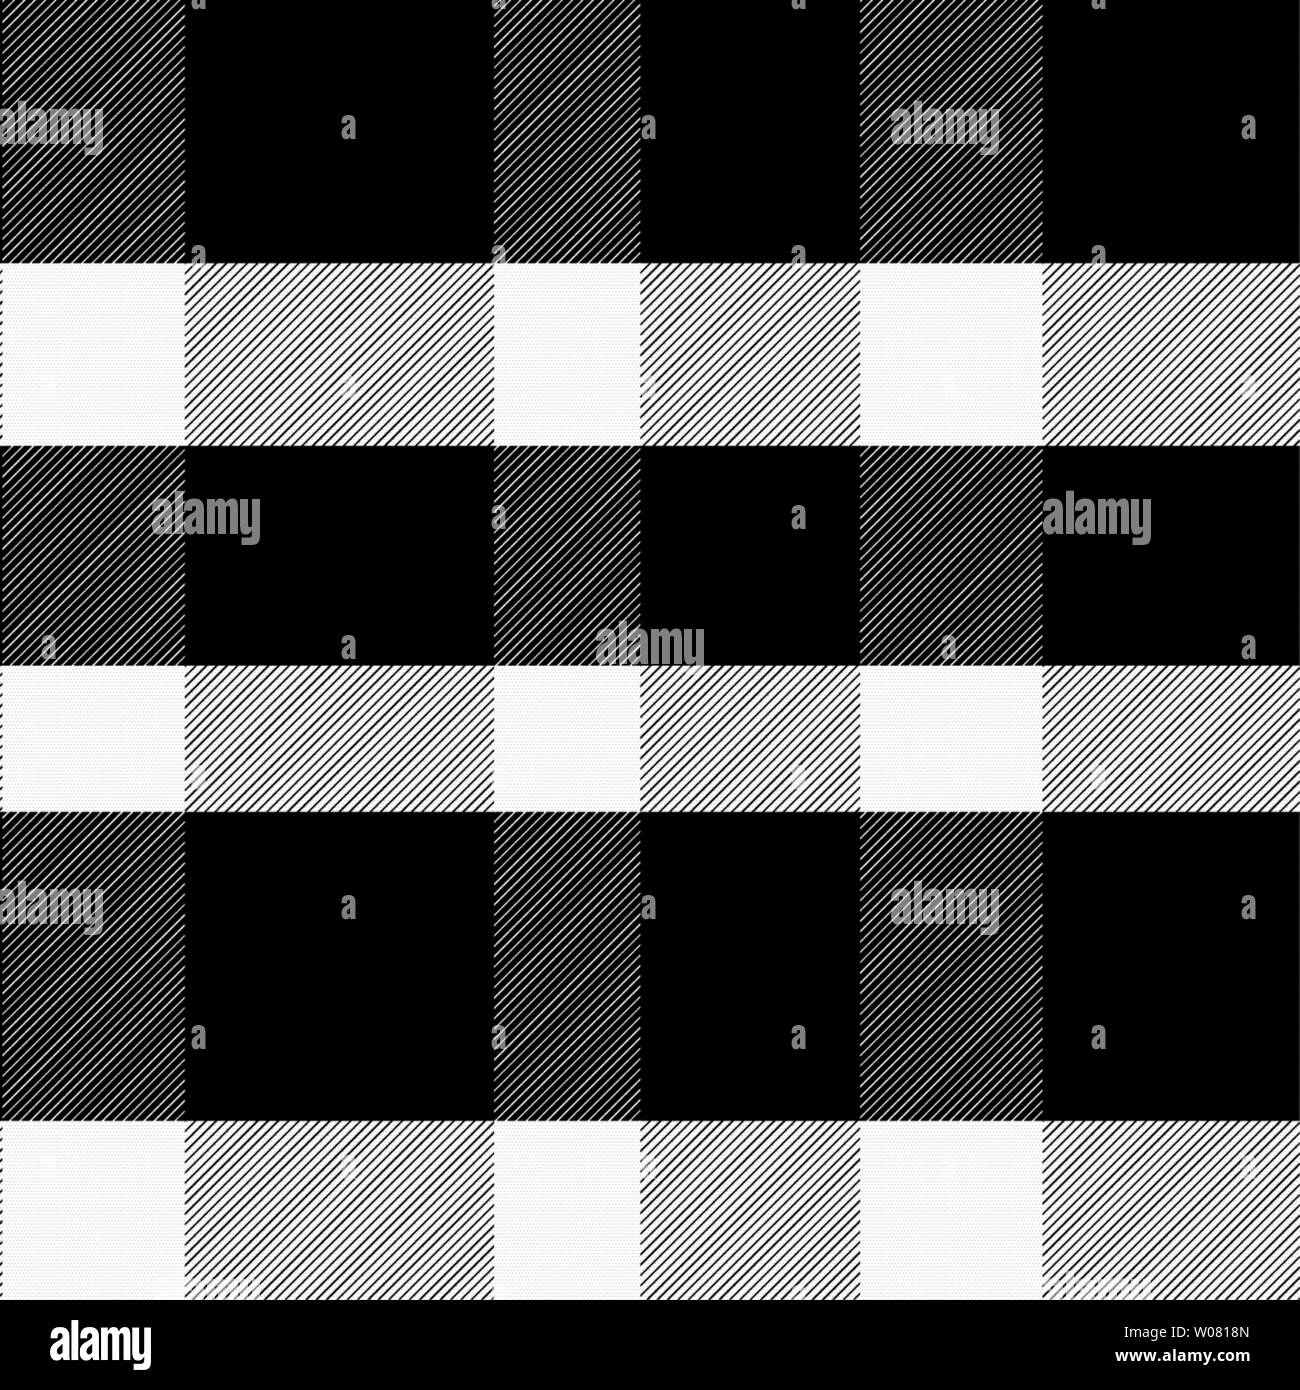 Tartan Pattern in Black White . Texture for plaid, tablecloths, clothes, shirts, dresses, paper, bedding, blankets, quilts and other textile products. Stock Vector